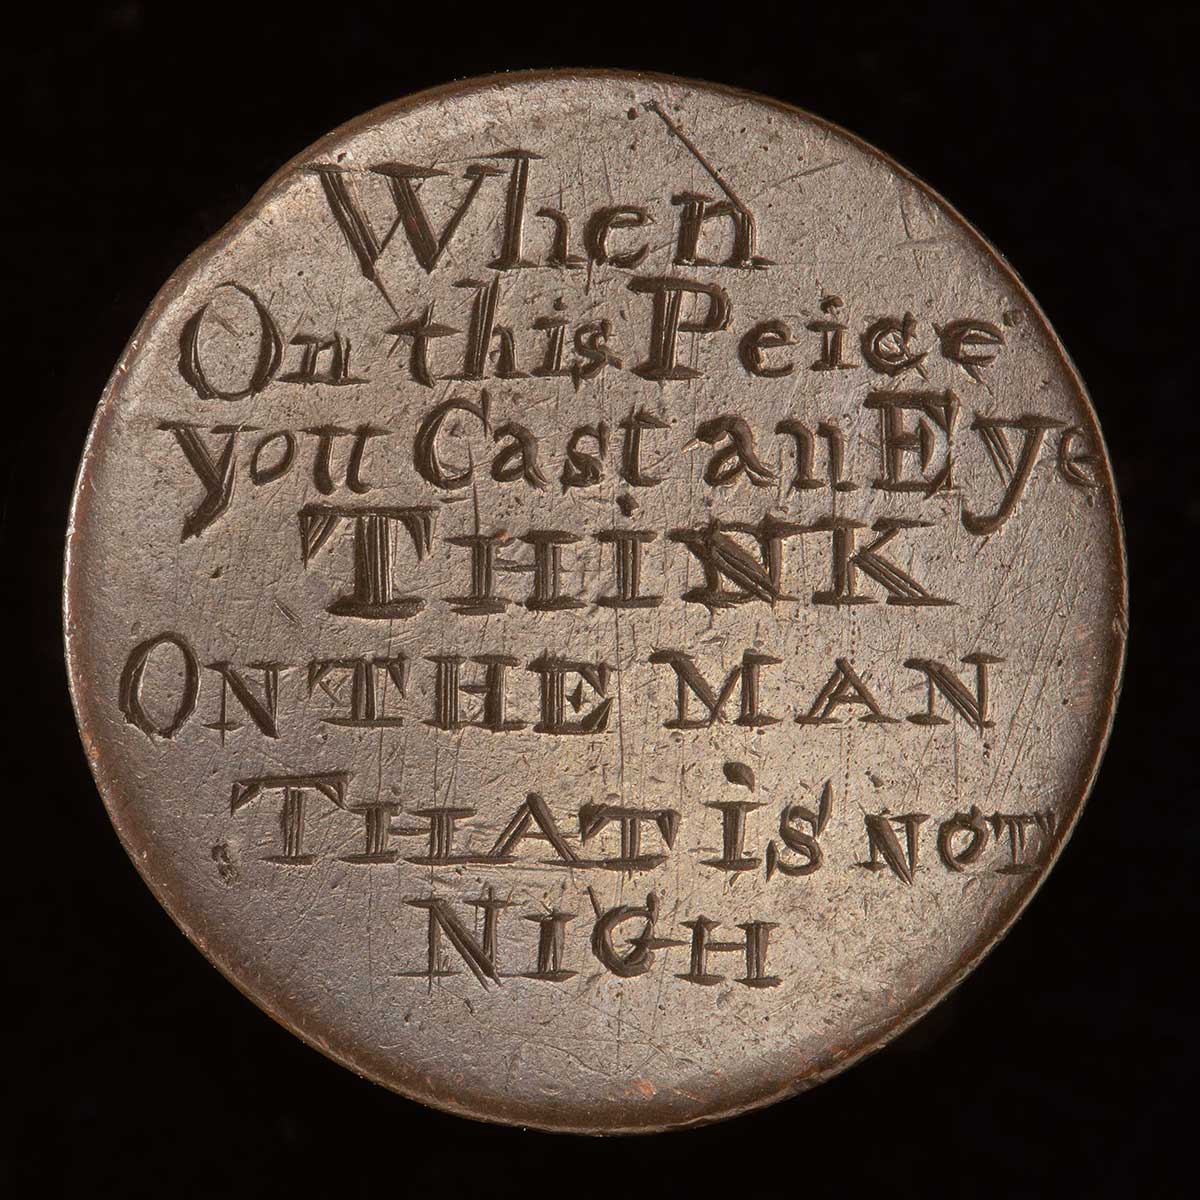 A convict love token made from a copper coin. Engraved on one face is 'When / On this Peice / you Cast an Eye / THiNK / ON THE MAN / THAT is NOT / NIGH'.